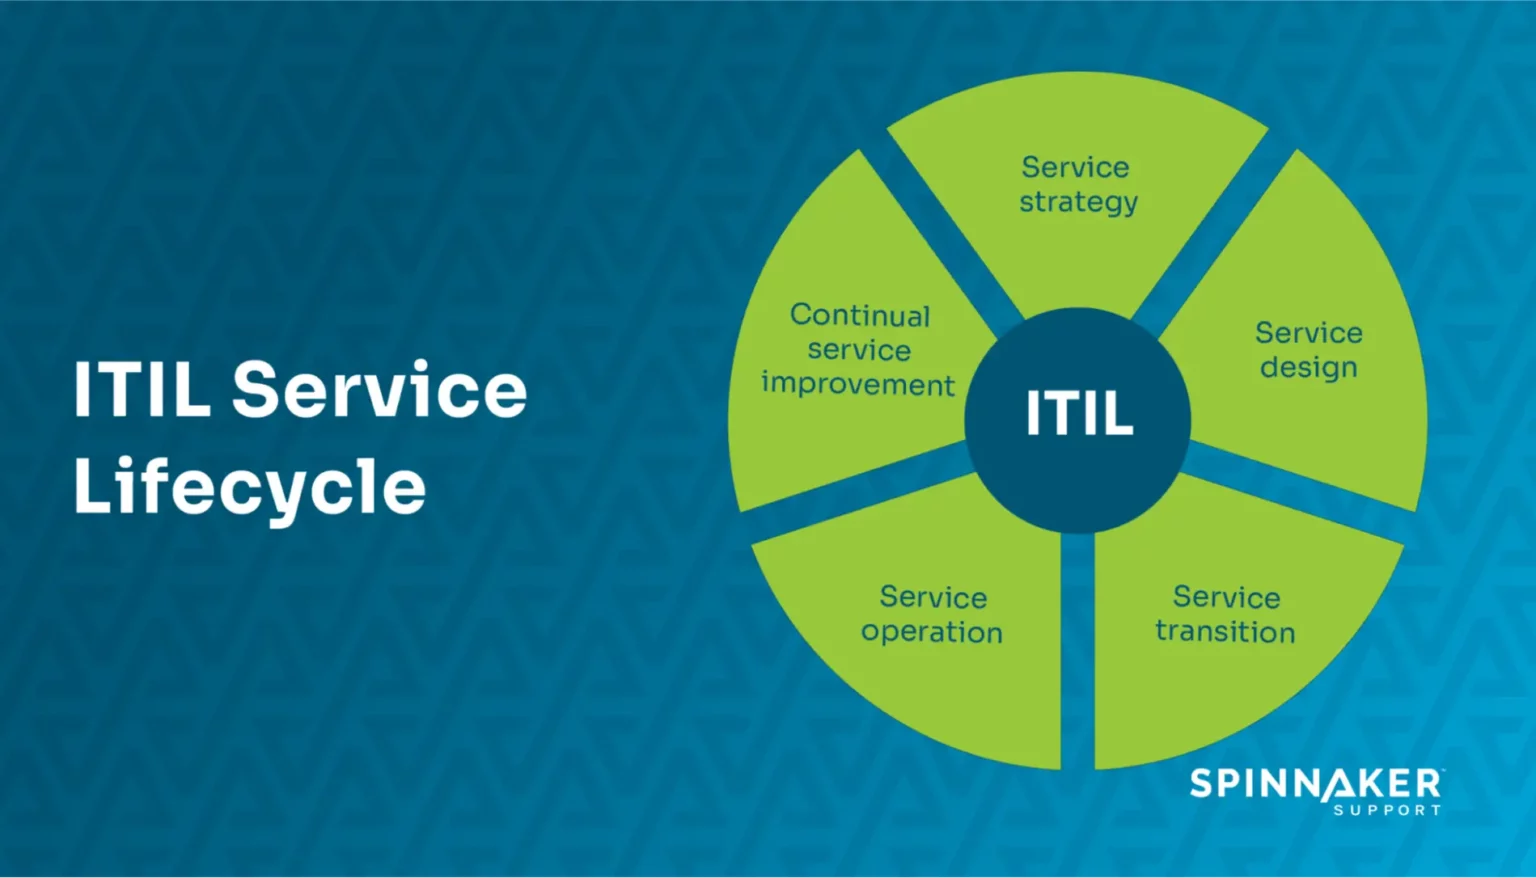 5 Stages of ITIL Service Lifecycle